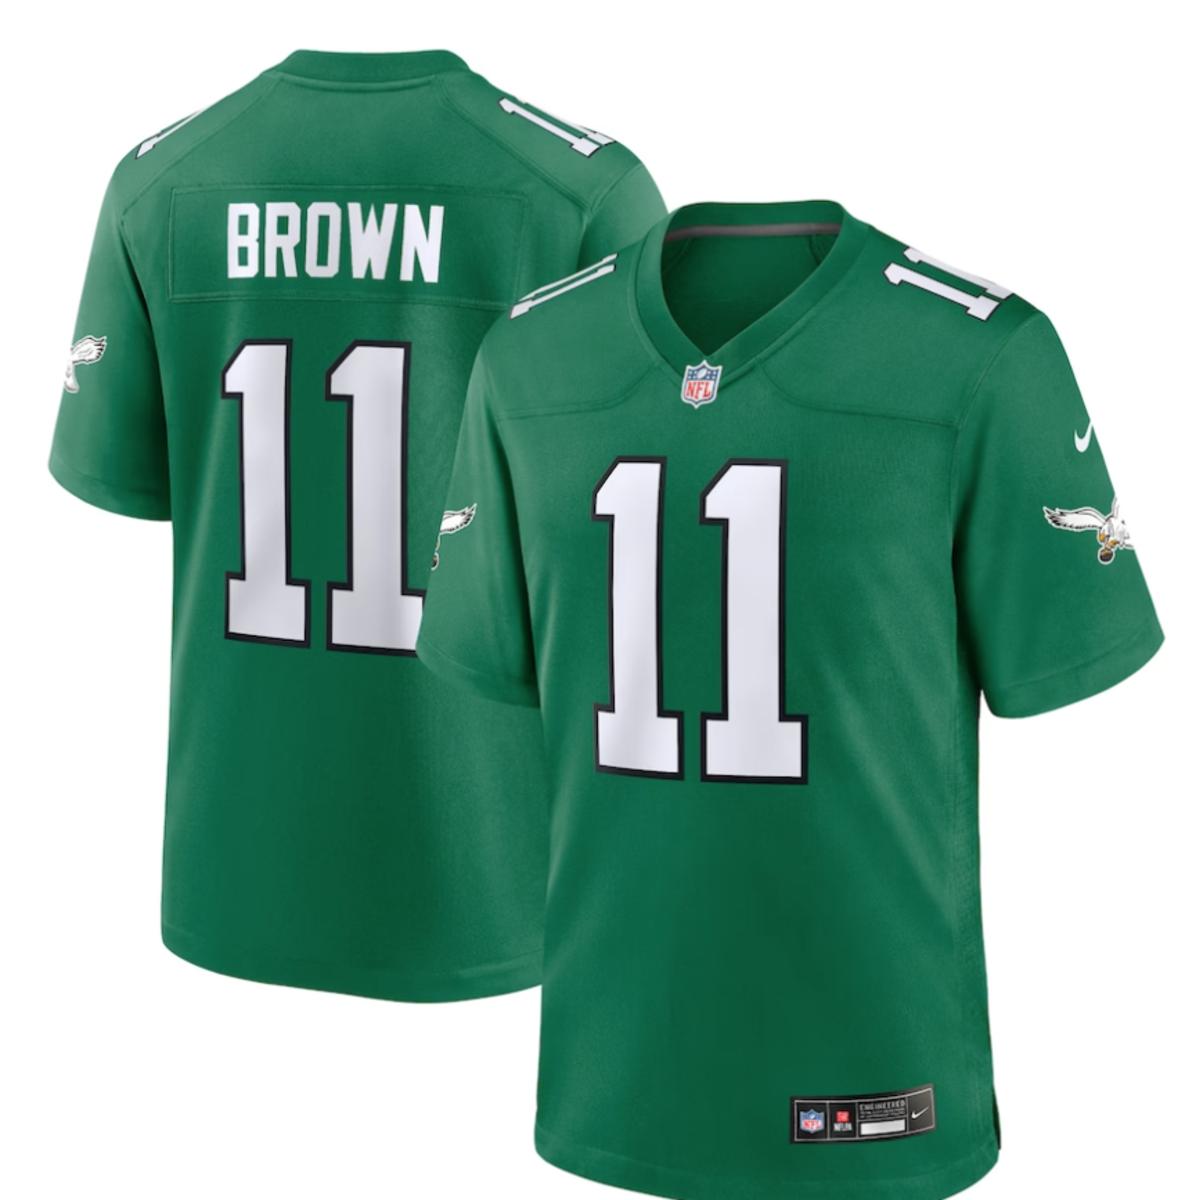 Eagles Throwback Jersey - FanNation